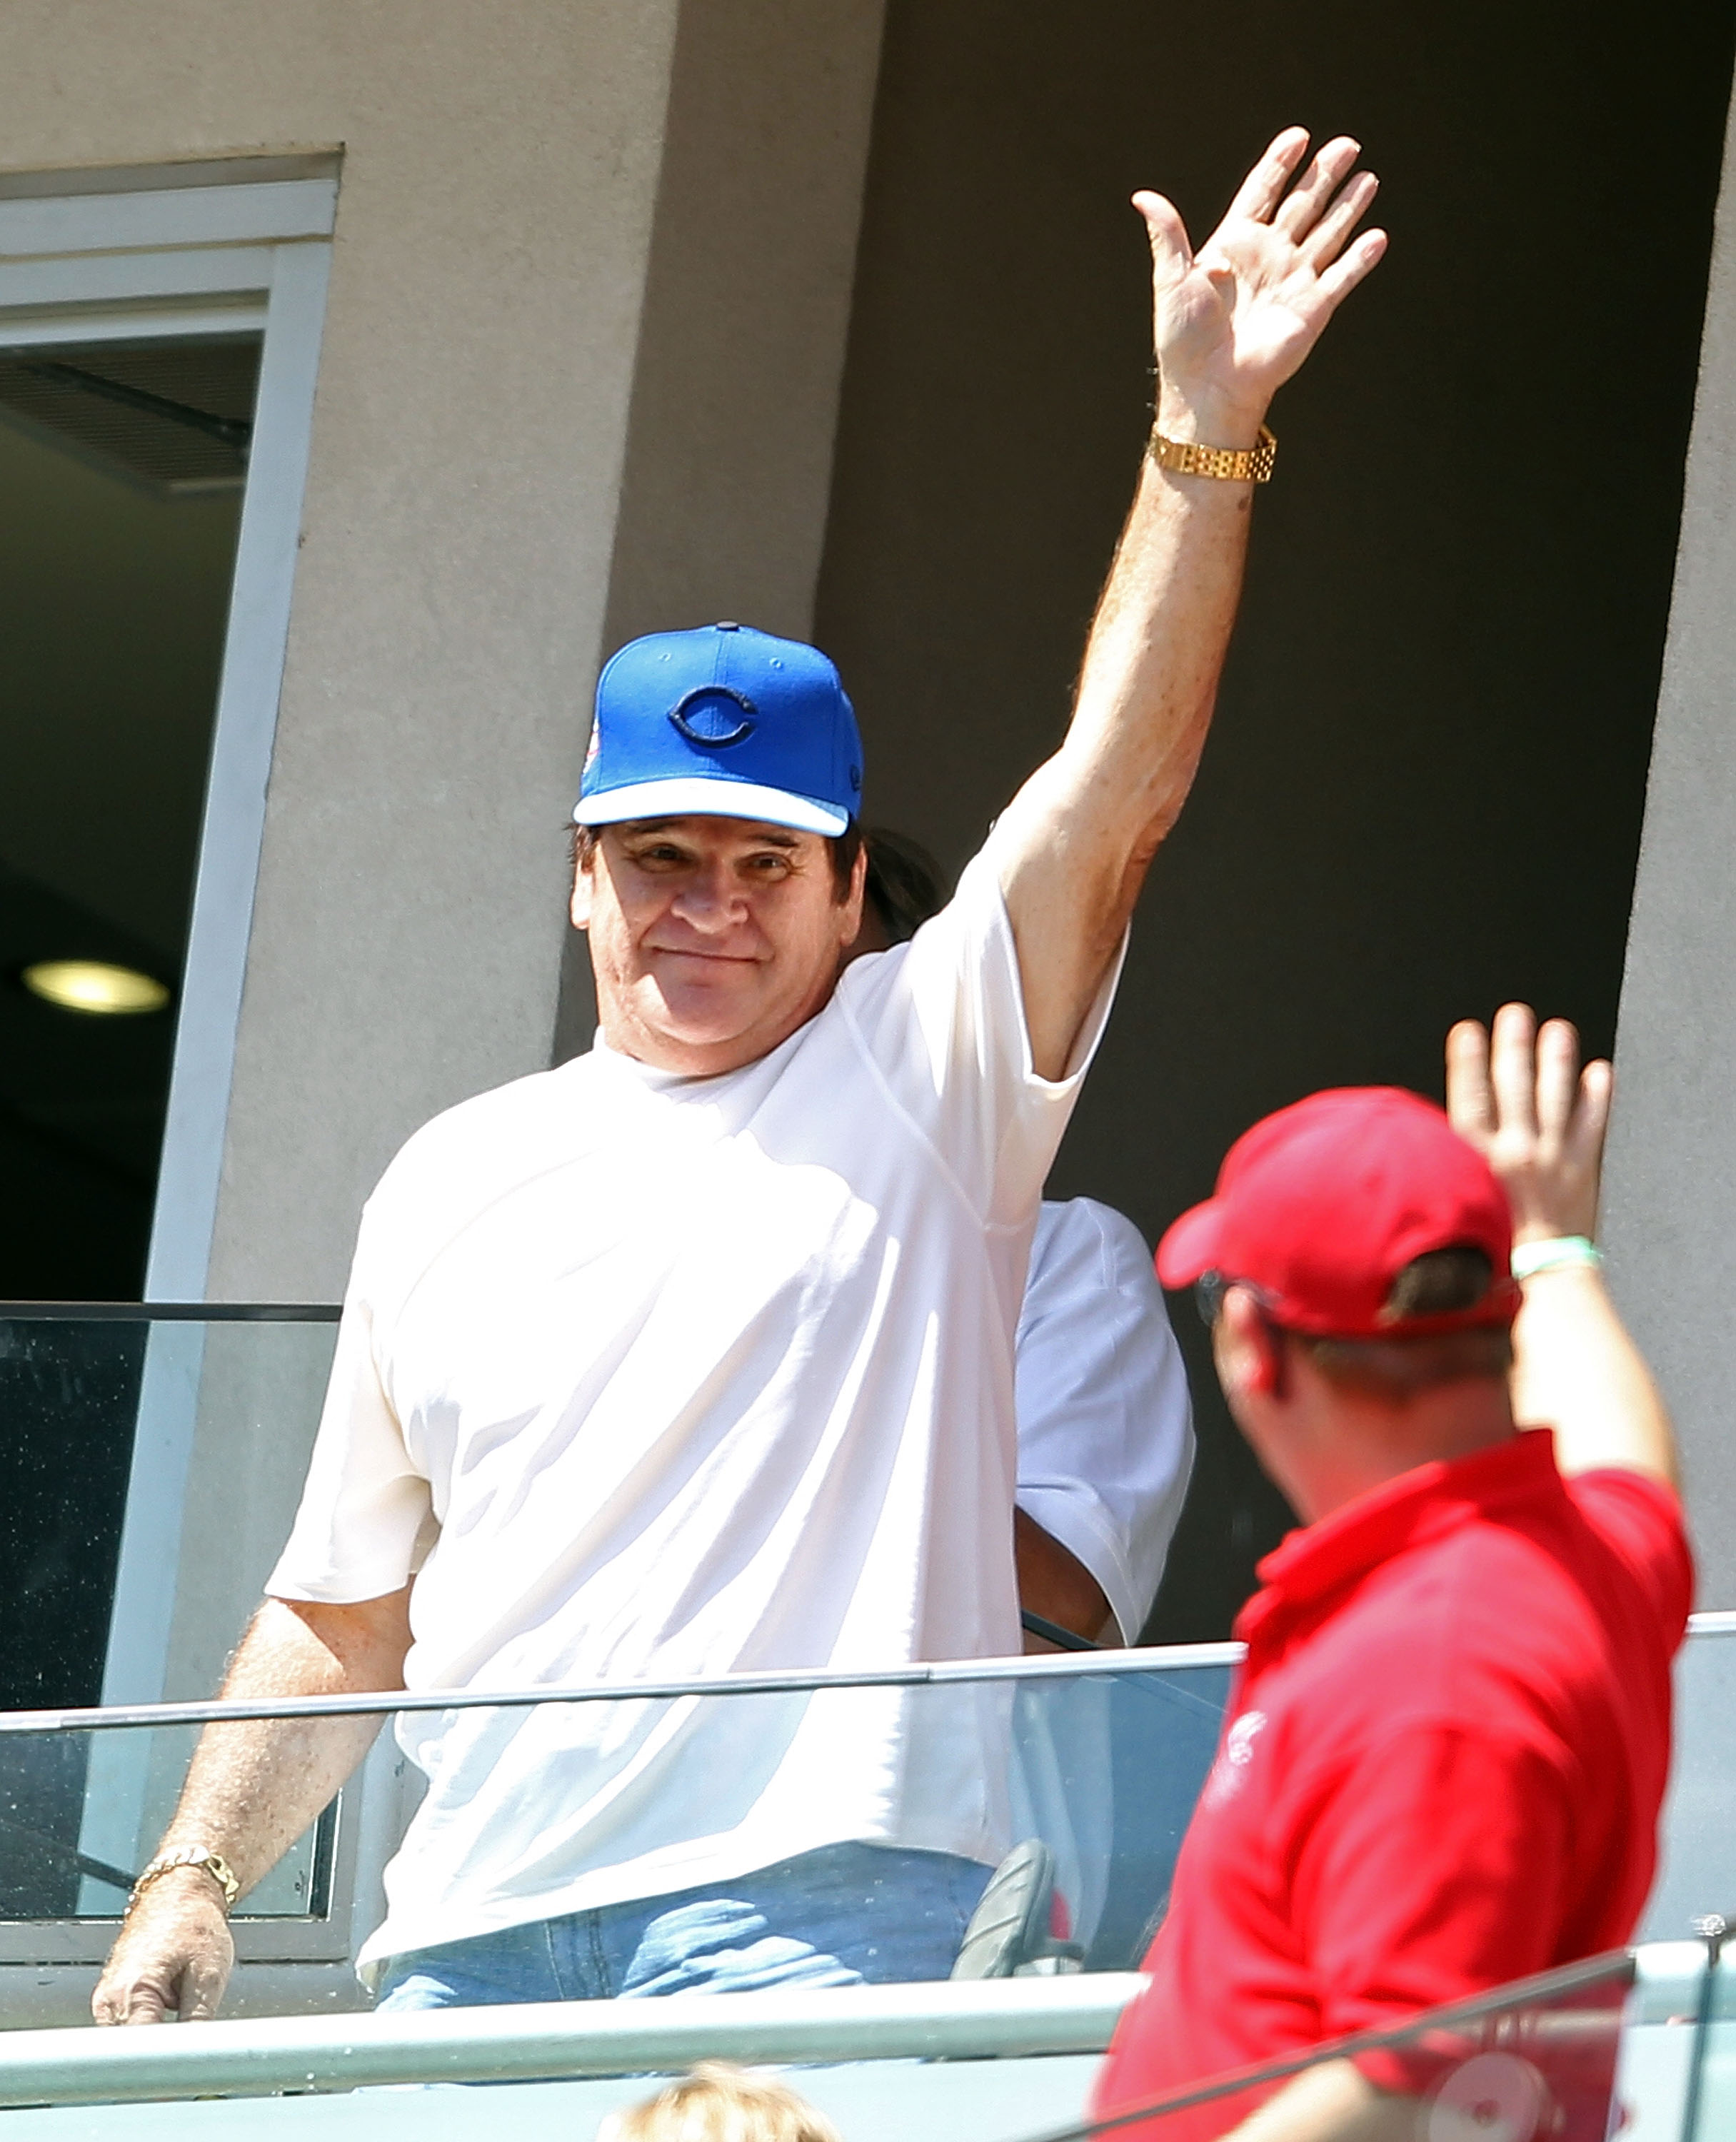 CINCINNATI - SEPTEMBER 12:  Pete Rose waves to the crowd during the Pittsburgh Pirates game against the Cincinnati Reds at Great American Ballpark on September 12, 2010 in Cincinnati, Ohio.  (Photo by Andy Lyons/Getty Images)